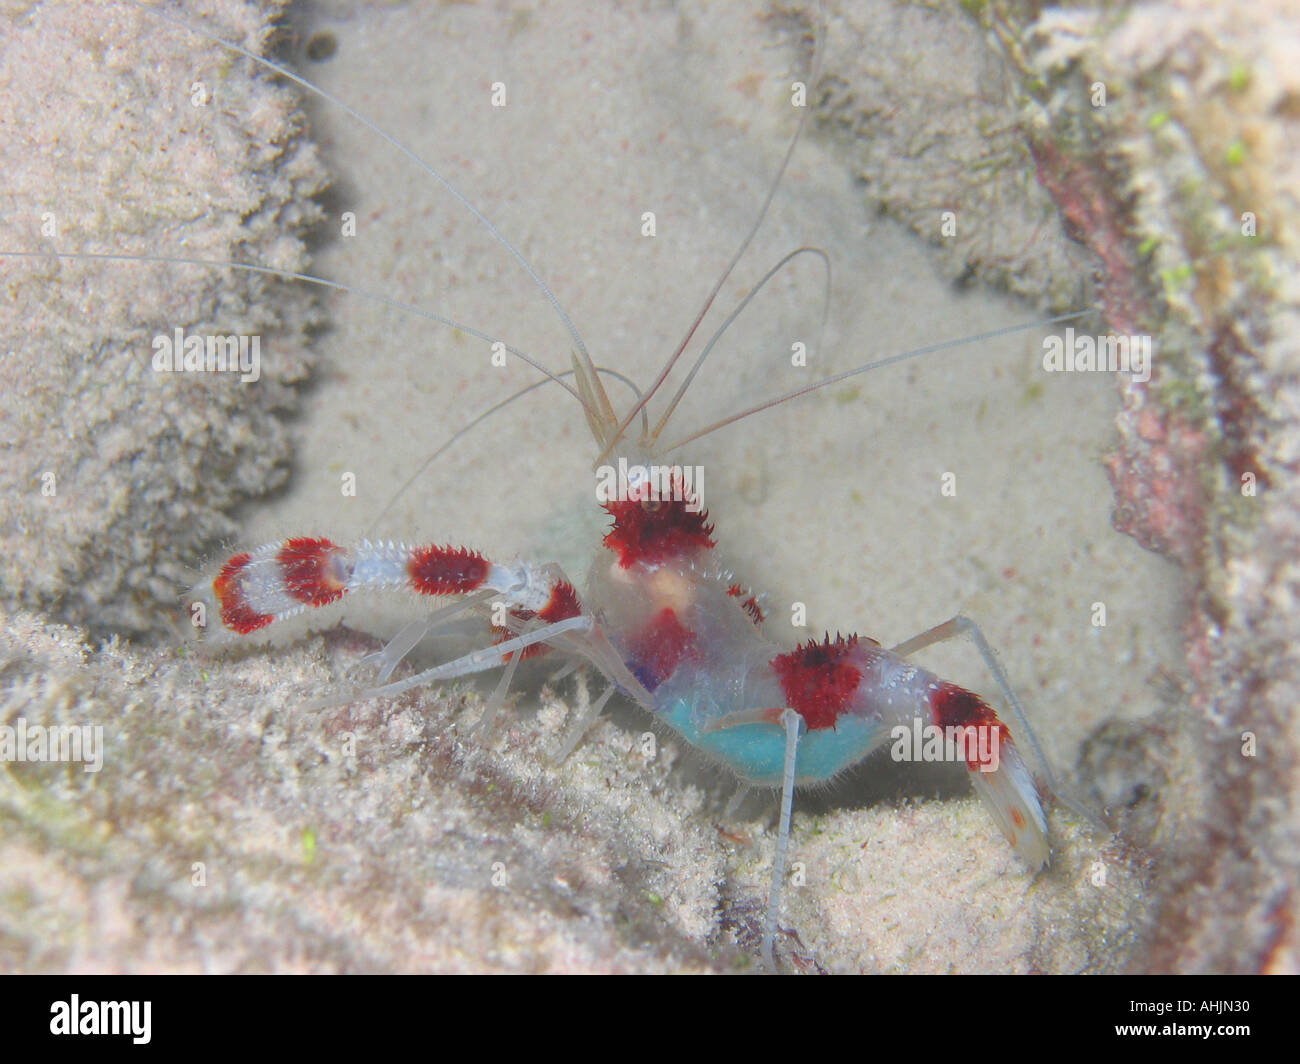 Banded coral cleaner shrimp Stock Photo